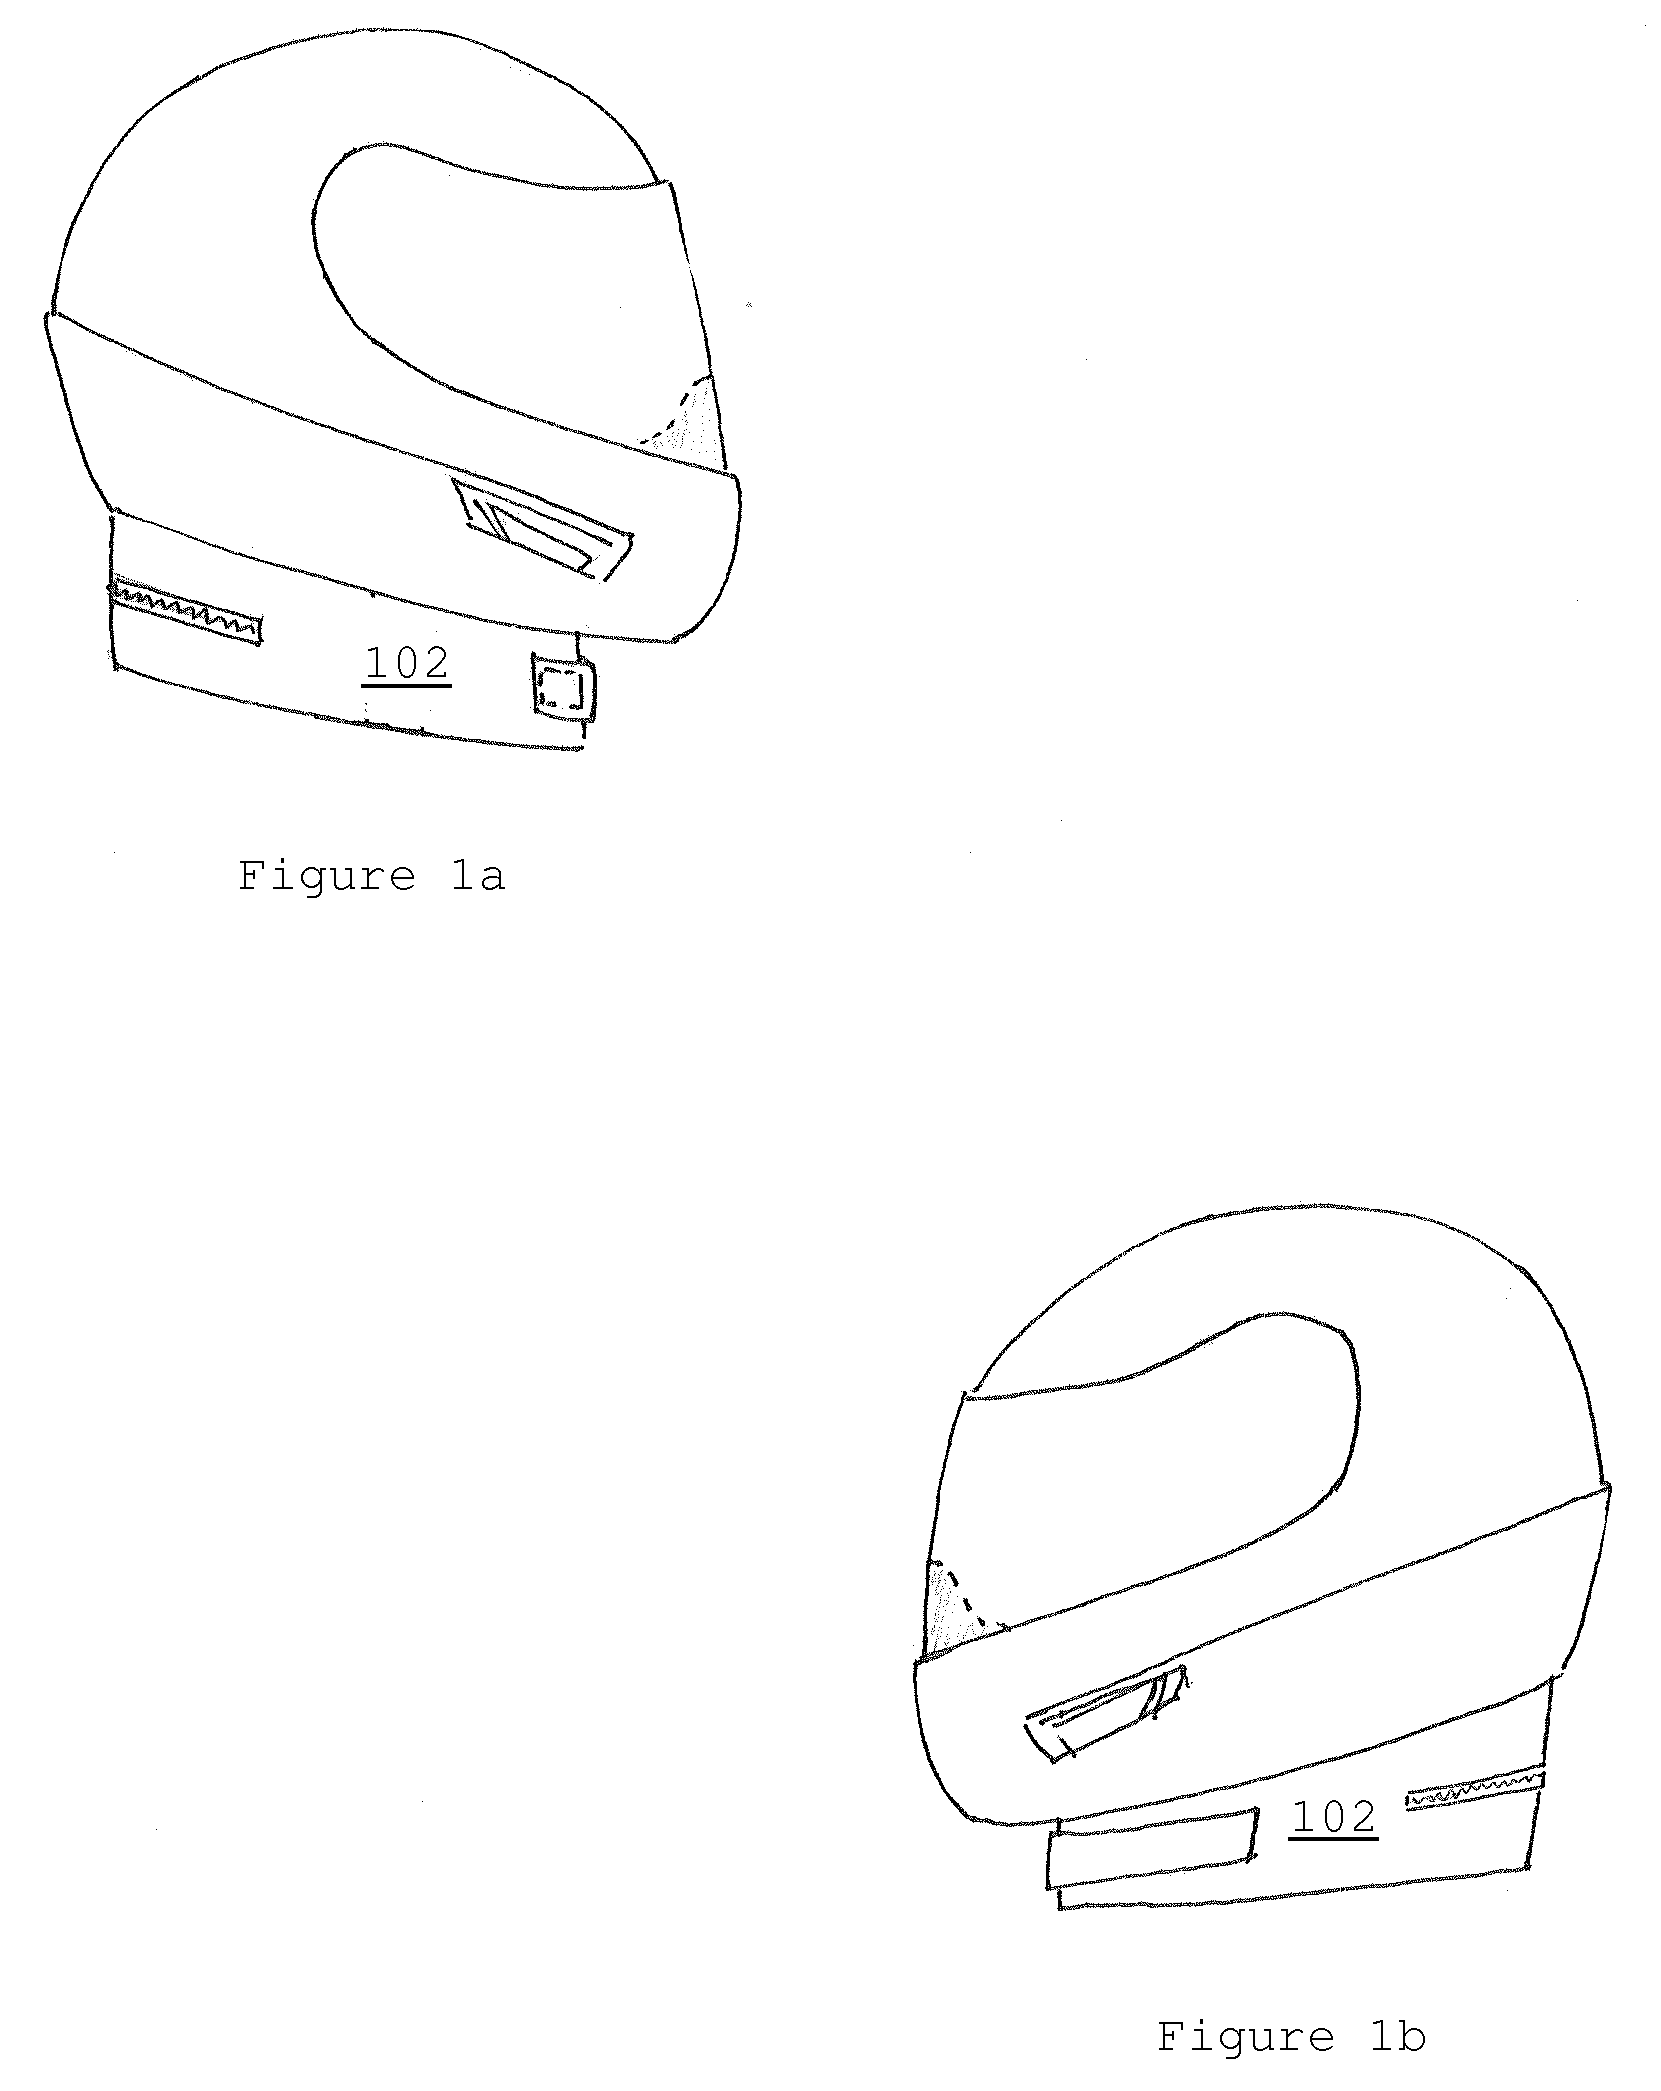 Motorcycle helmet with a spinal cord protective device